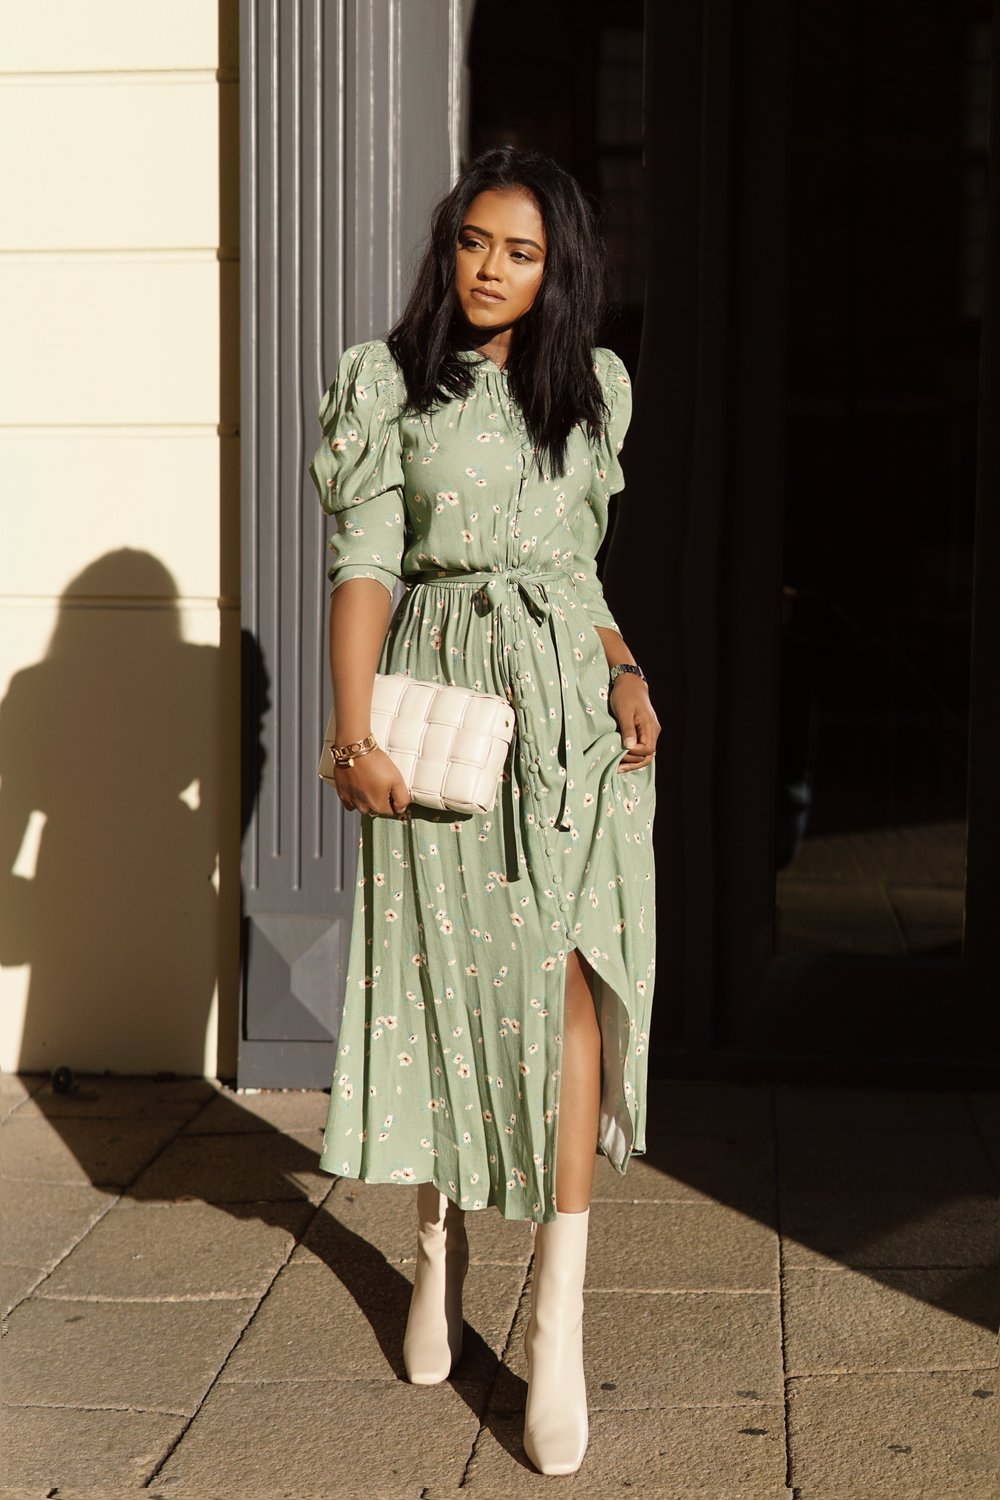 Sachini wearing a green Ghost Fashion dress and white & Other Stories shoes